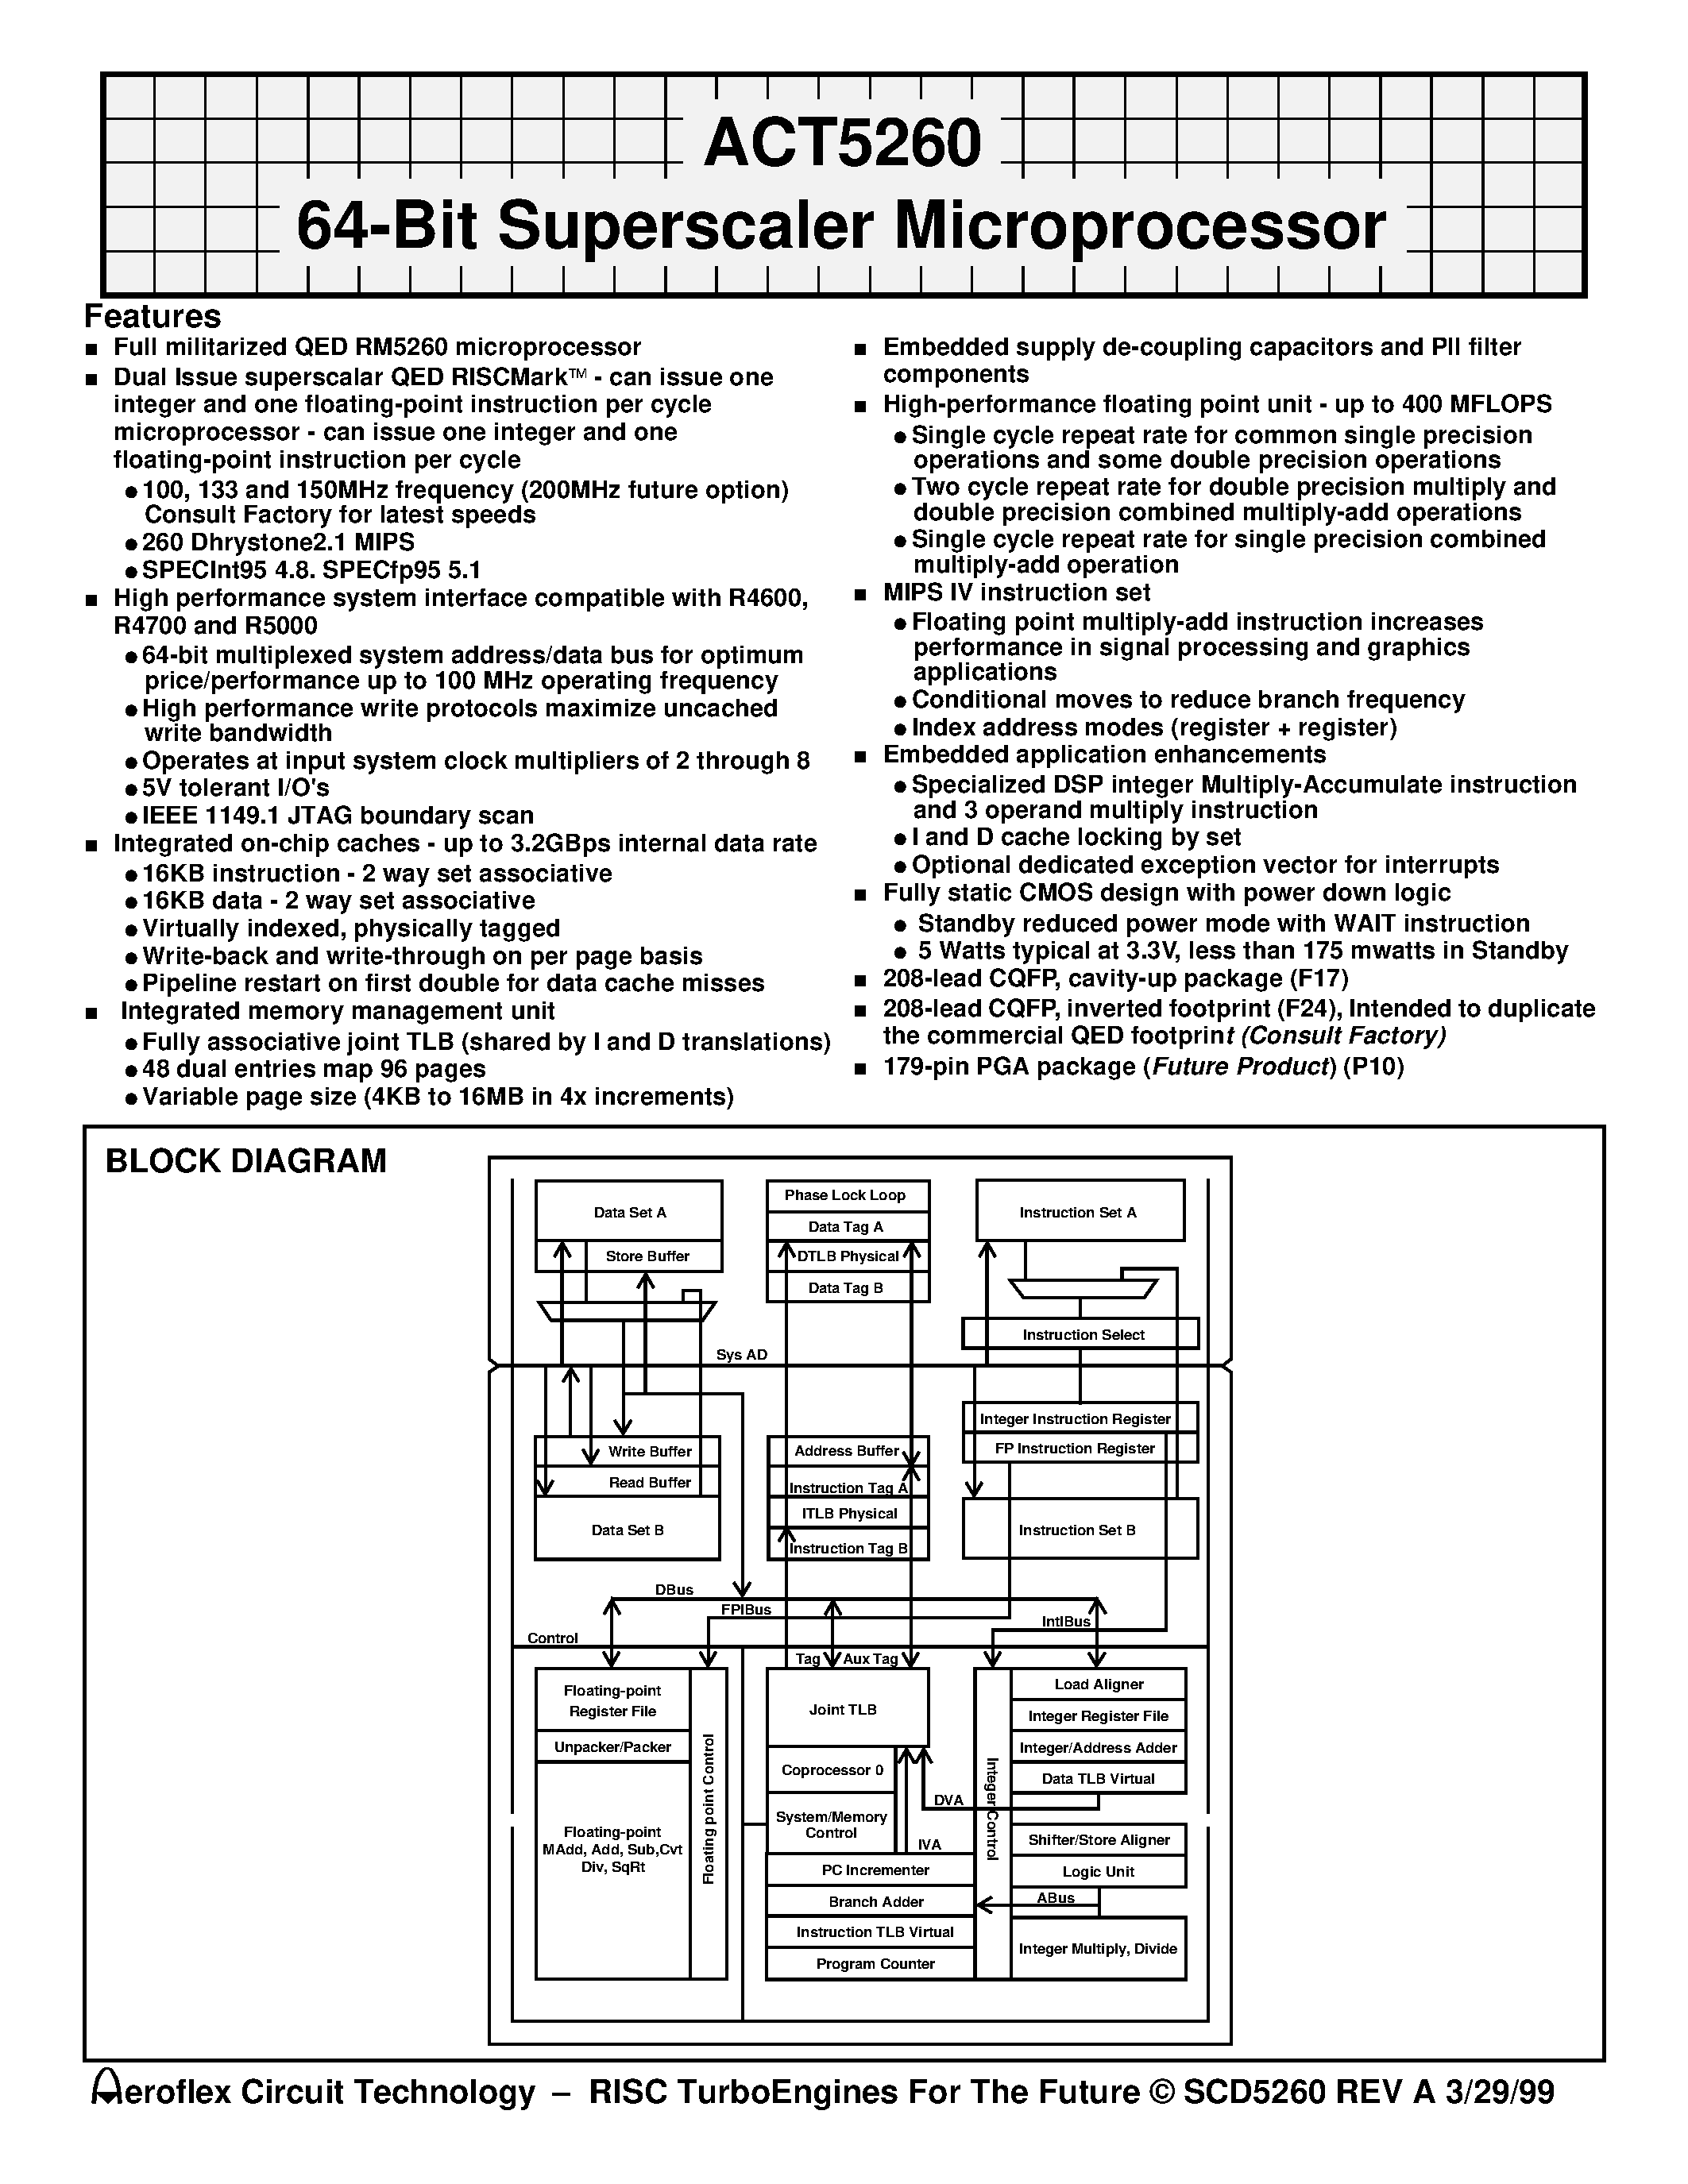 Datasheet ACT-5260PC-100F17Q - ACT5260 64-Bit Superscaler Microprocessor page 1